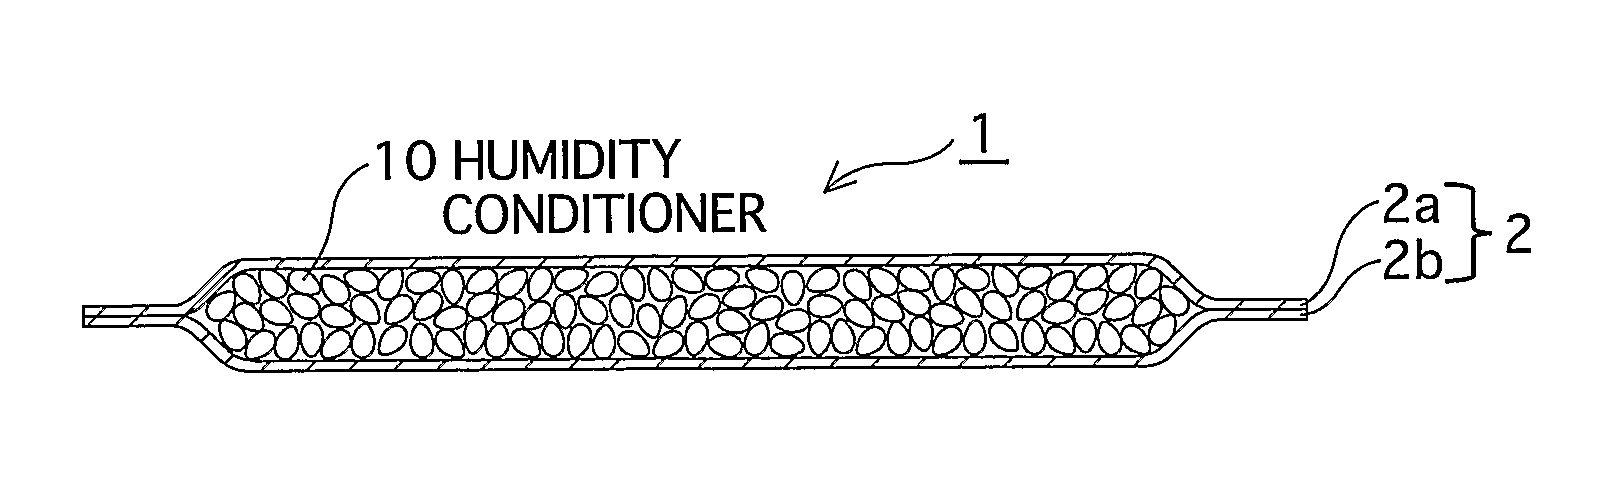 Humidity conditioner and humidity conditioning method using the same